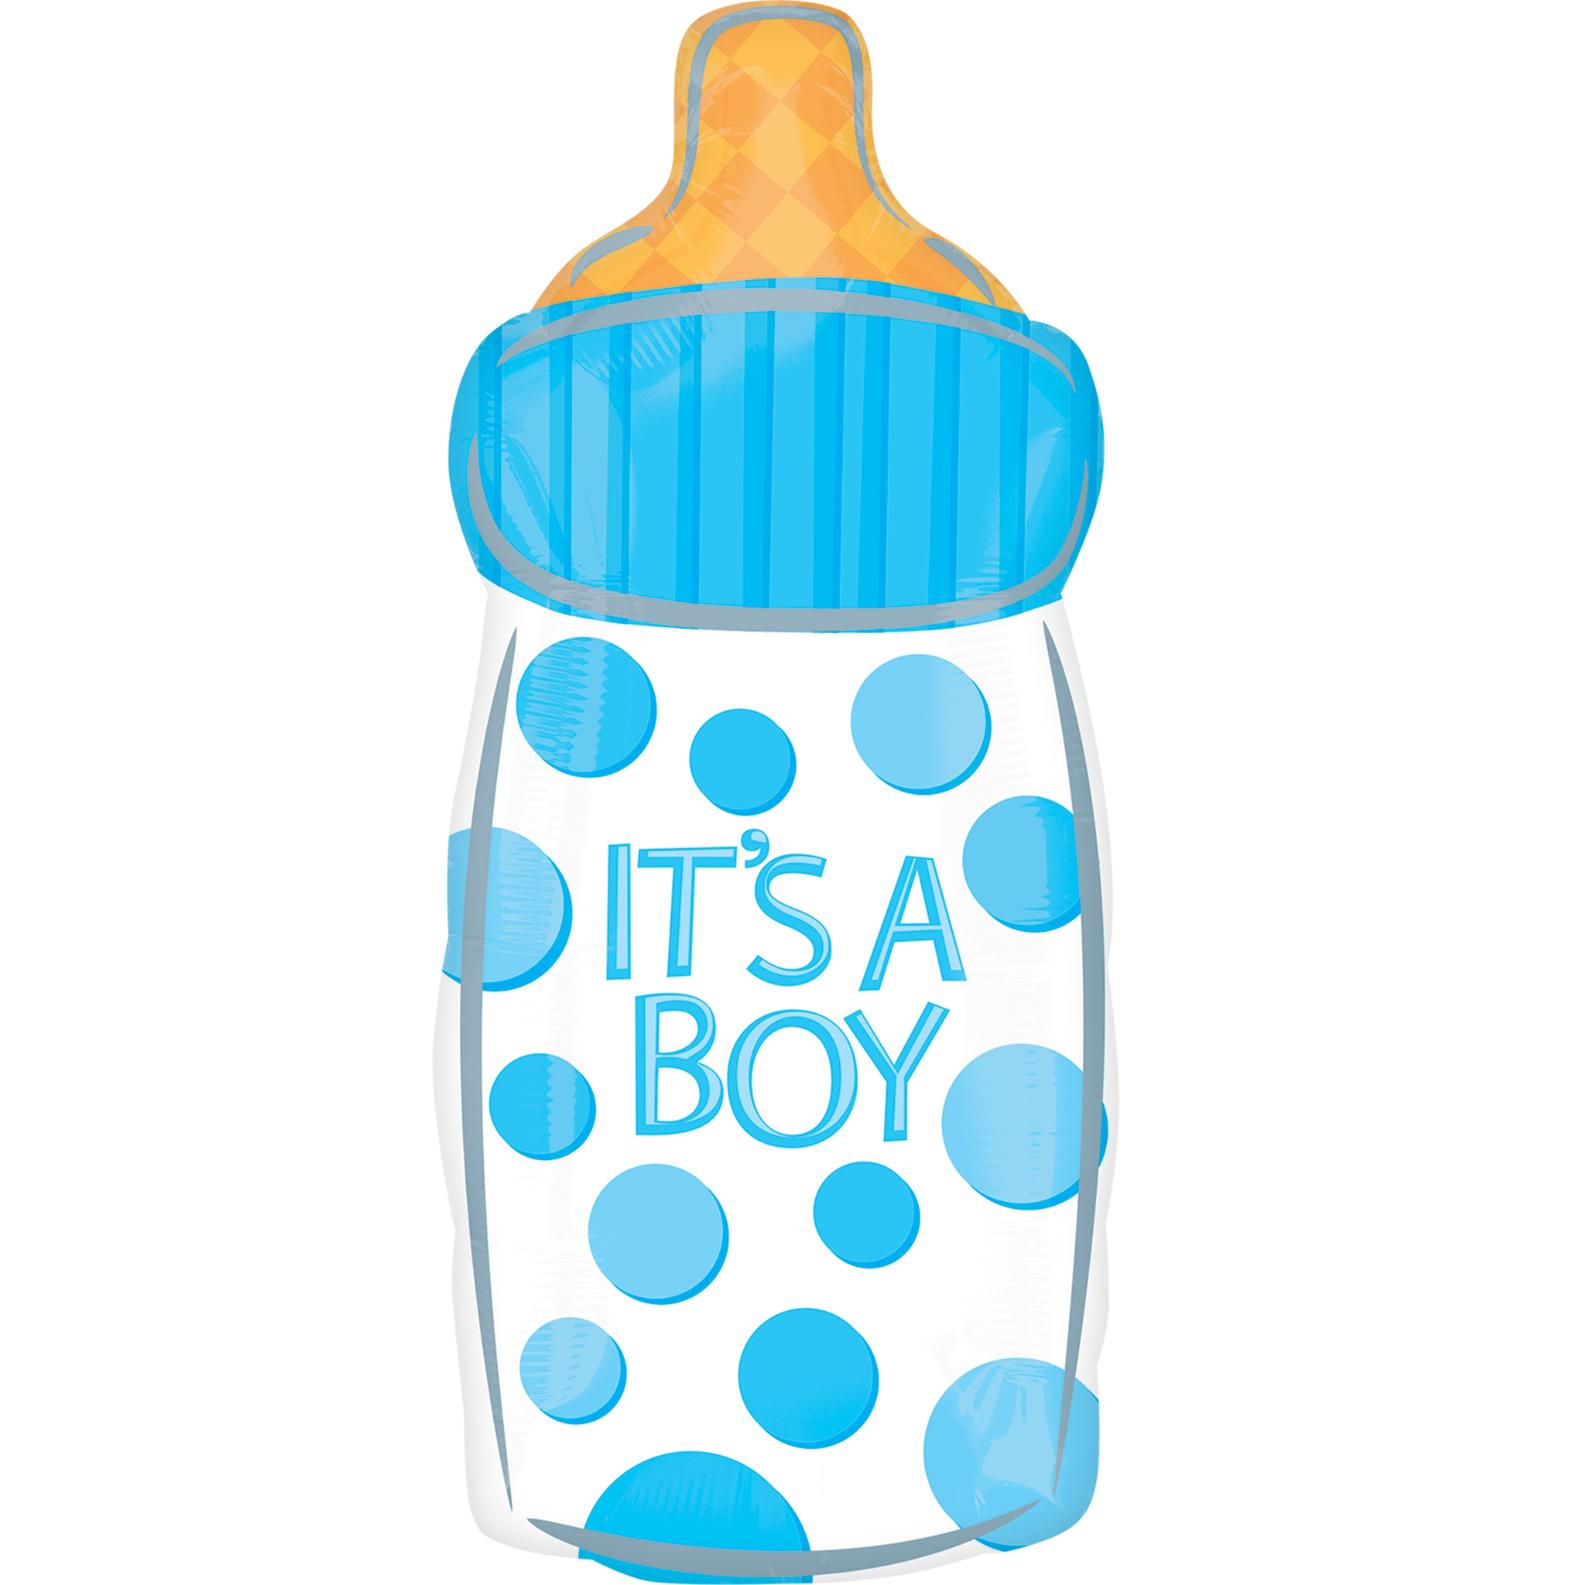 It's A Boy Baby Bottle Junior Shape Foil Balloon Balloons & Streamers - Party Centre - Party Centre